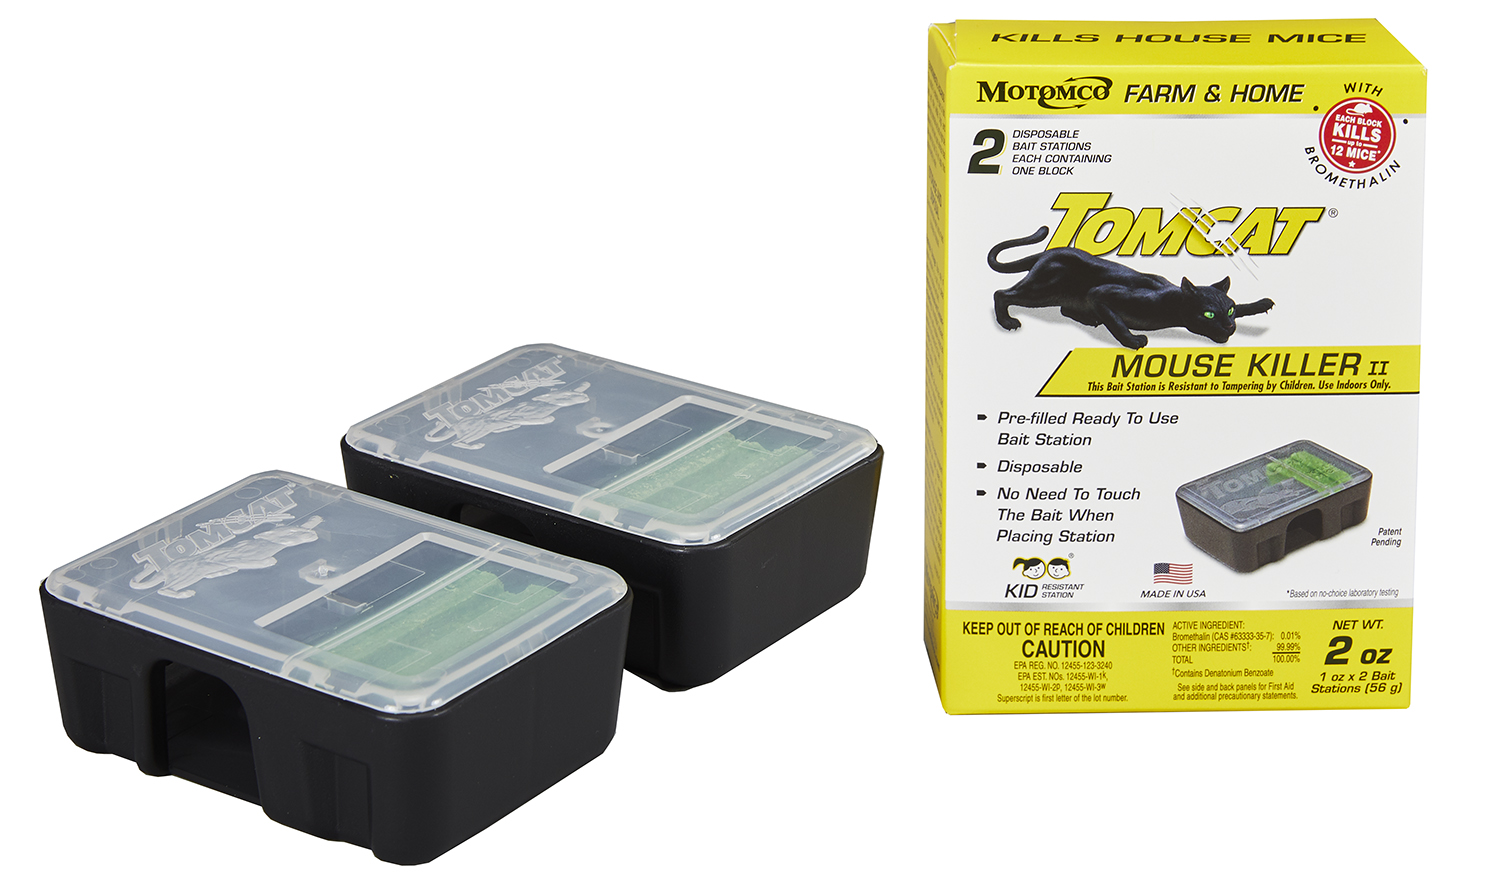 https://www.motomco.com/images/products/23620-TomcatDisposable2pk.jpg